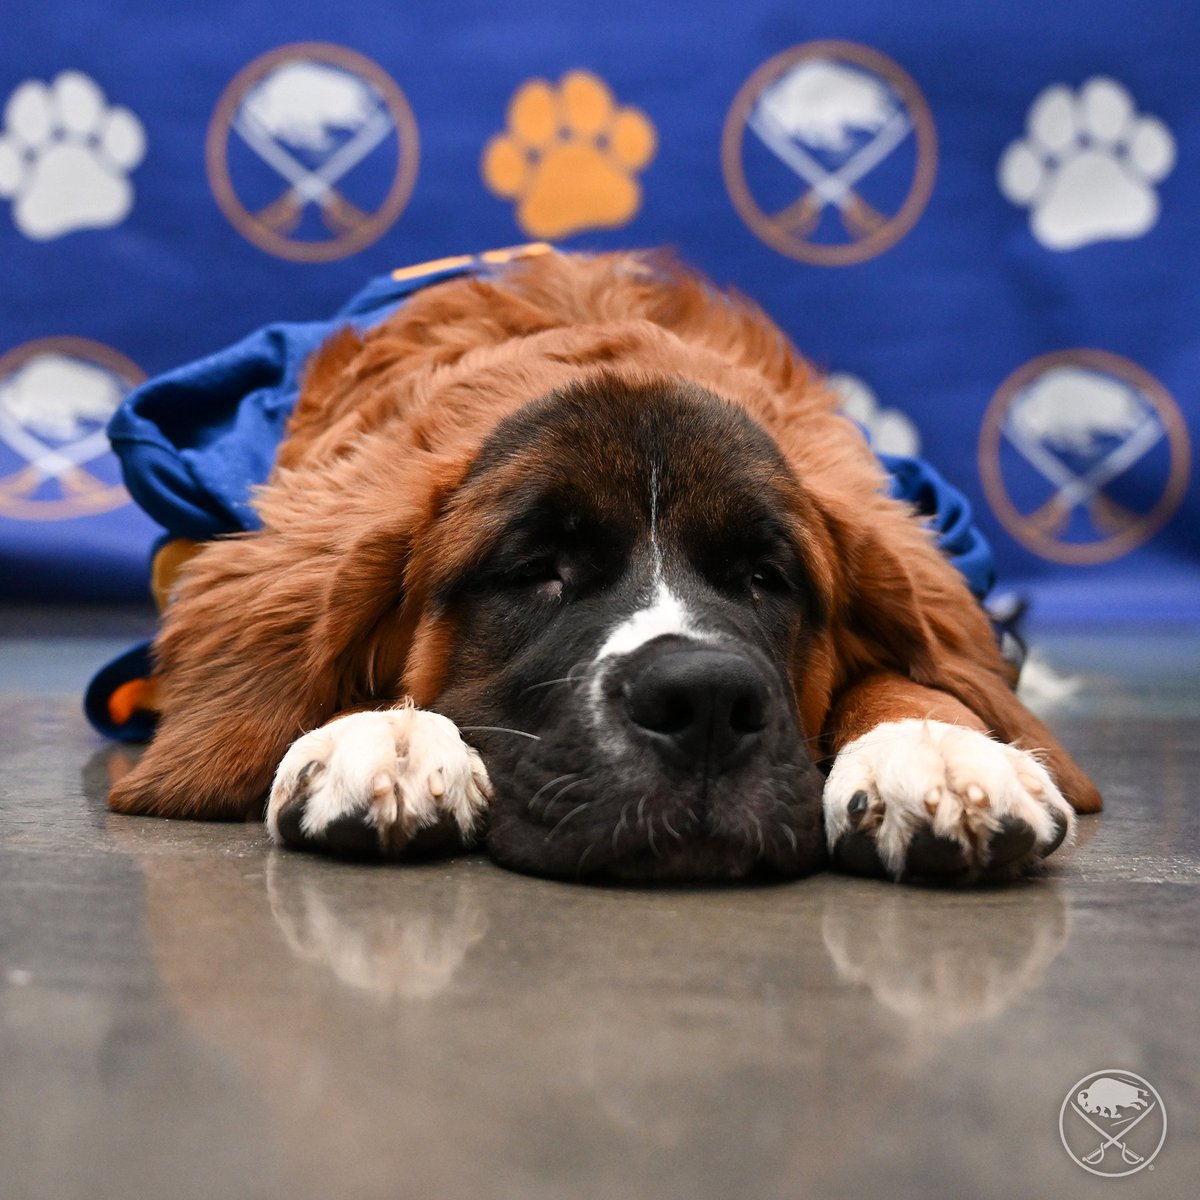 Don't miss our Pet Adoption Event at @KeyBankCtr on May 11 from 10 a.m. to 2 p.m. 🐶 Bring home your new best friend: bufsabres.co/3UdkTZE